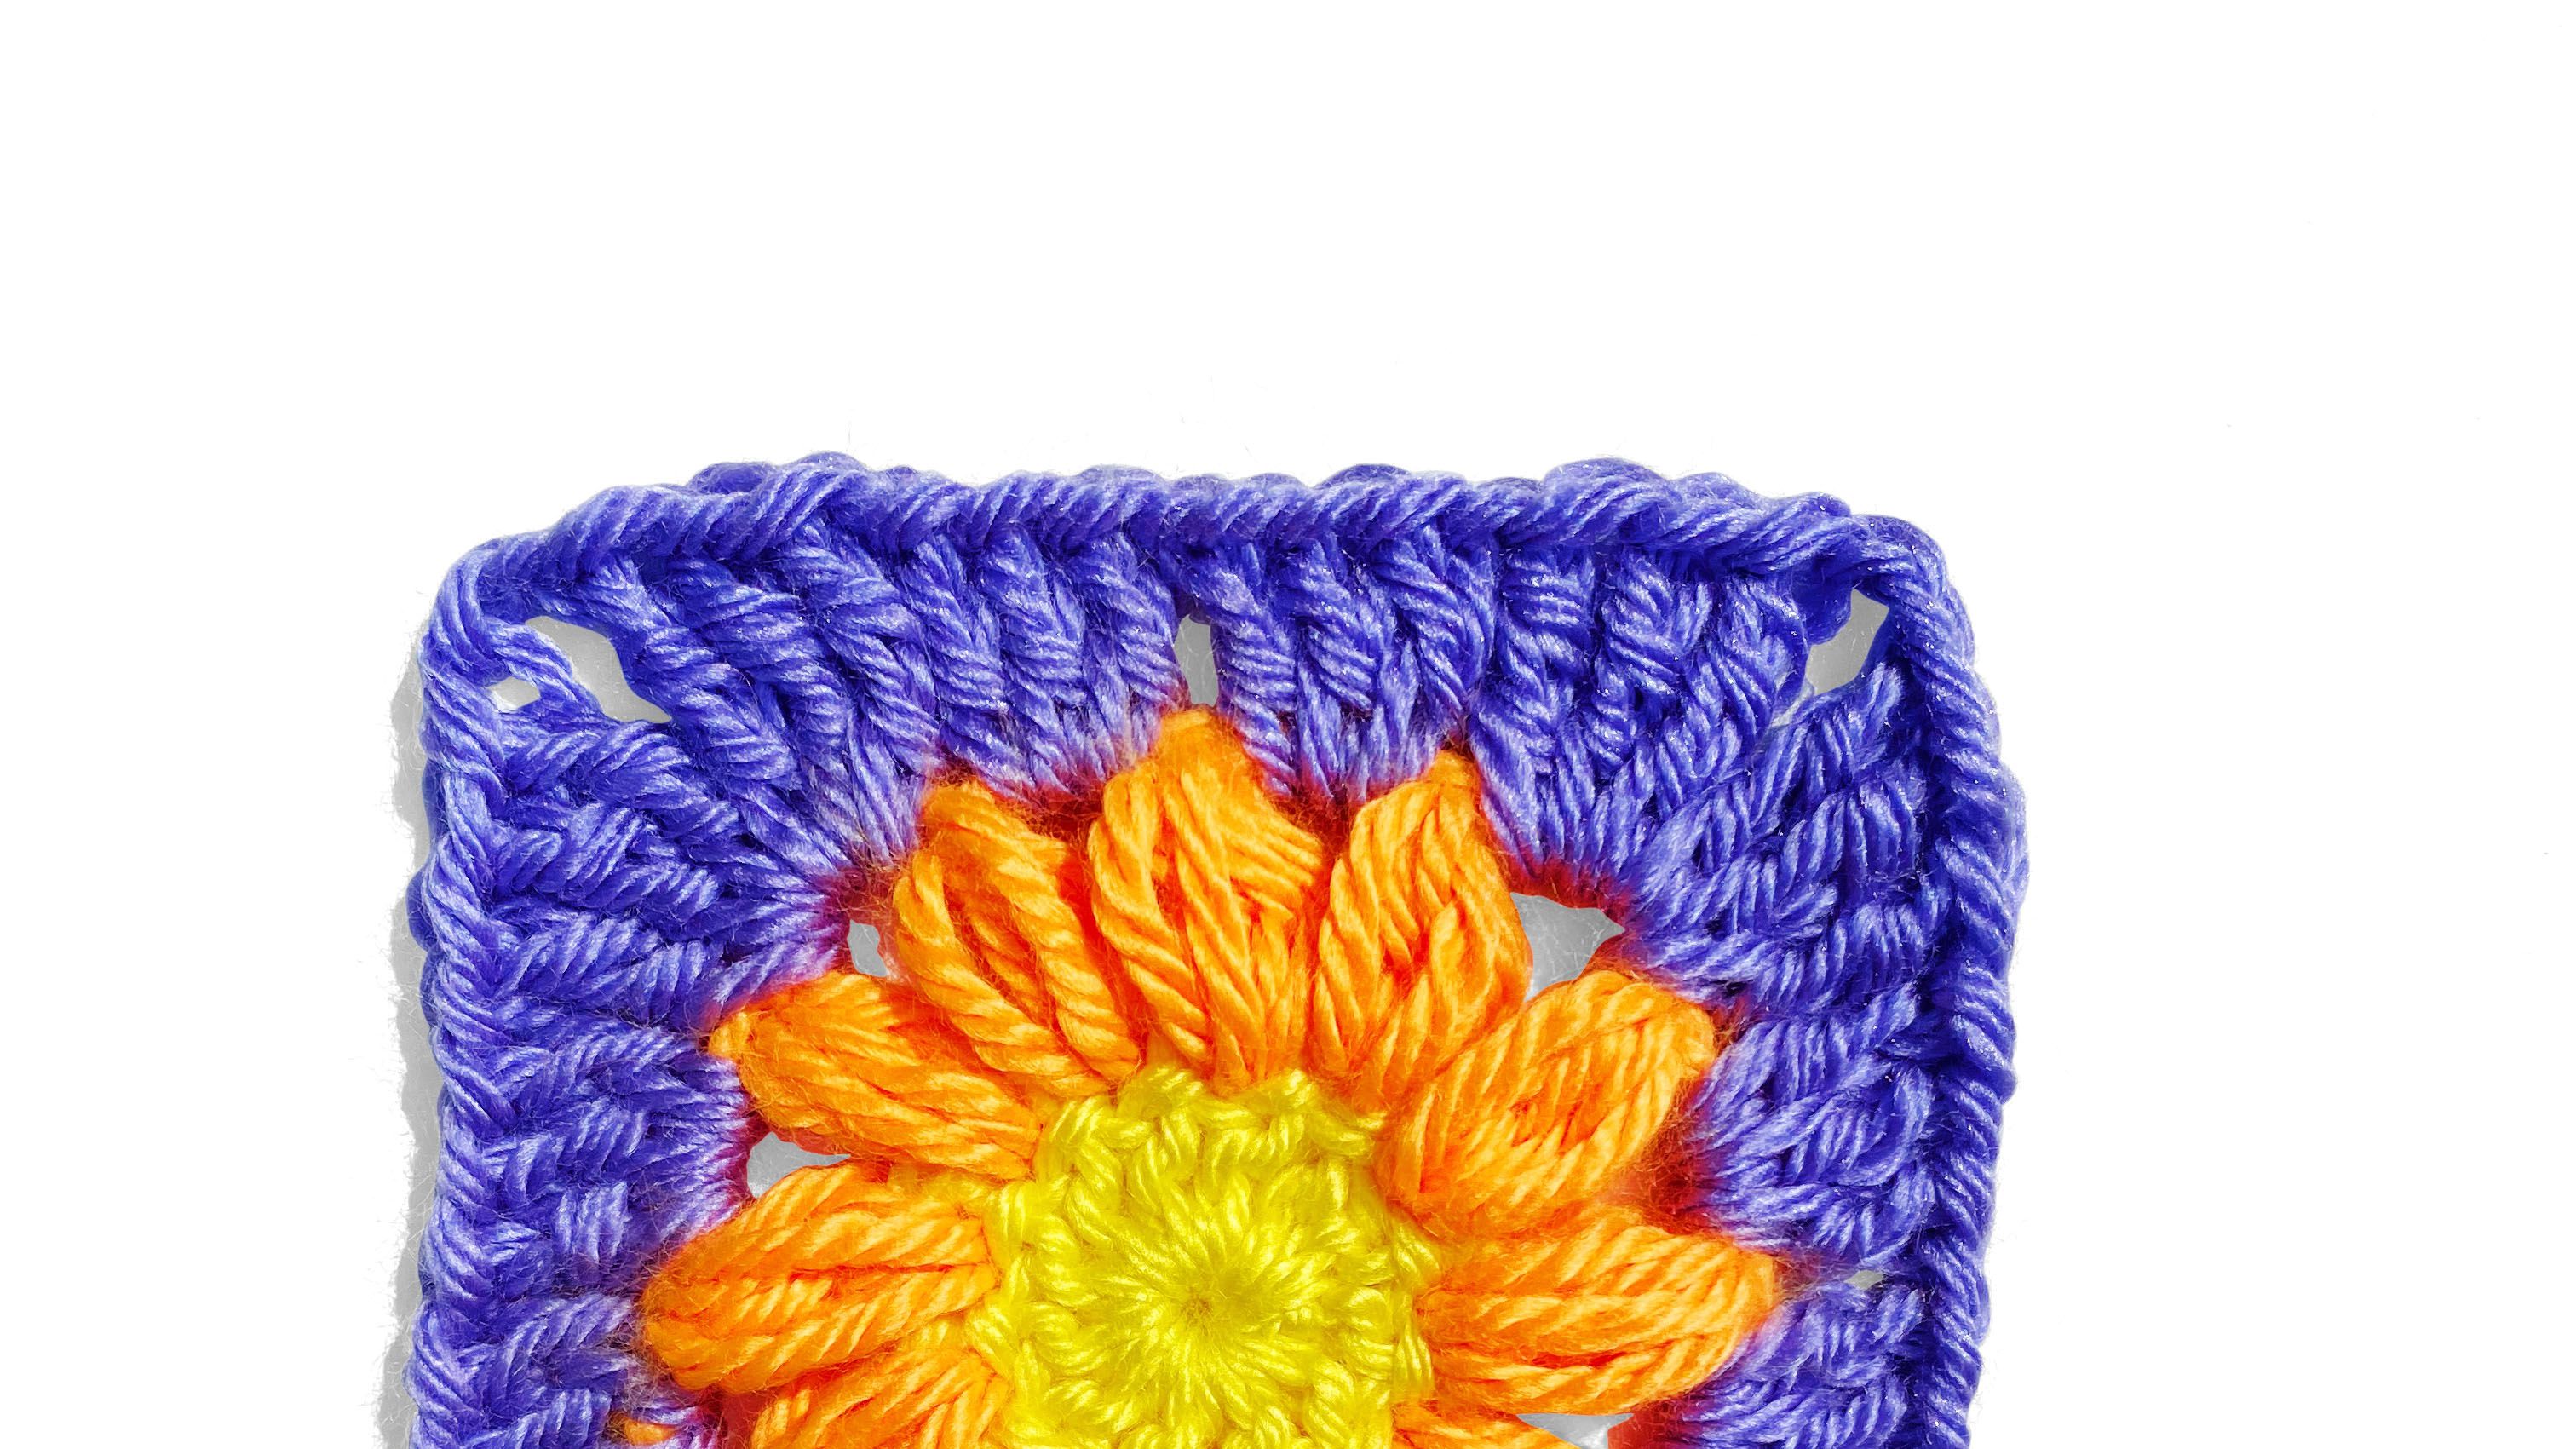 Daisy Flower Crochet STEP BY STEP TUTORIAL with English Sub